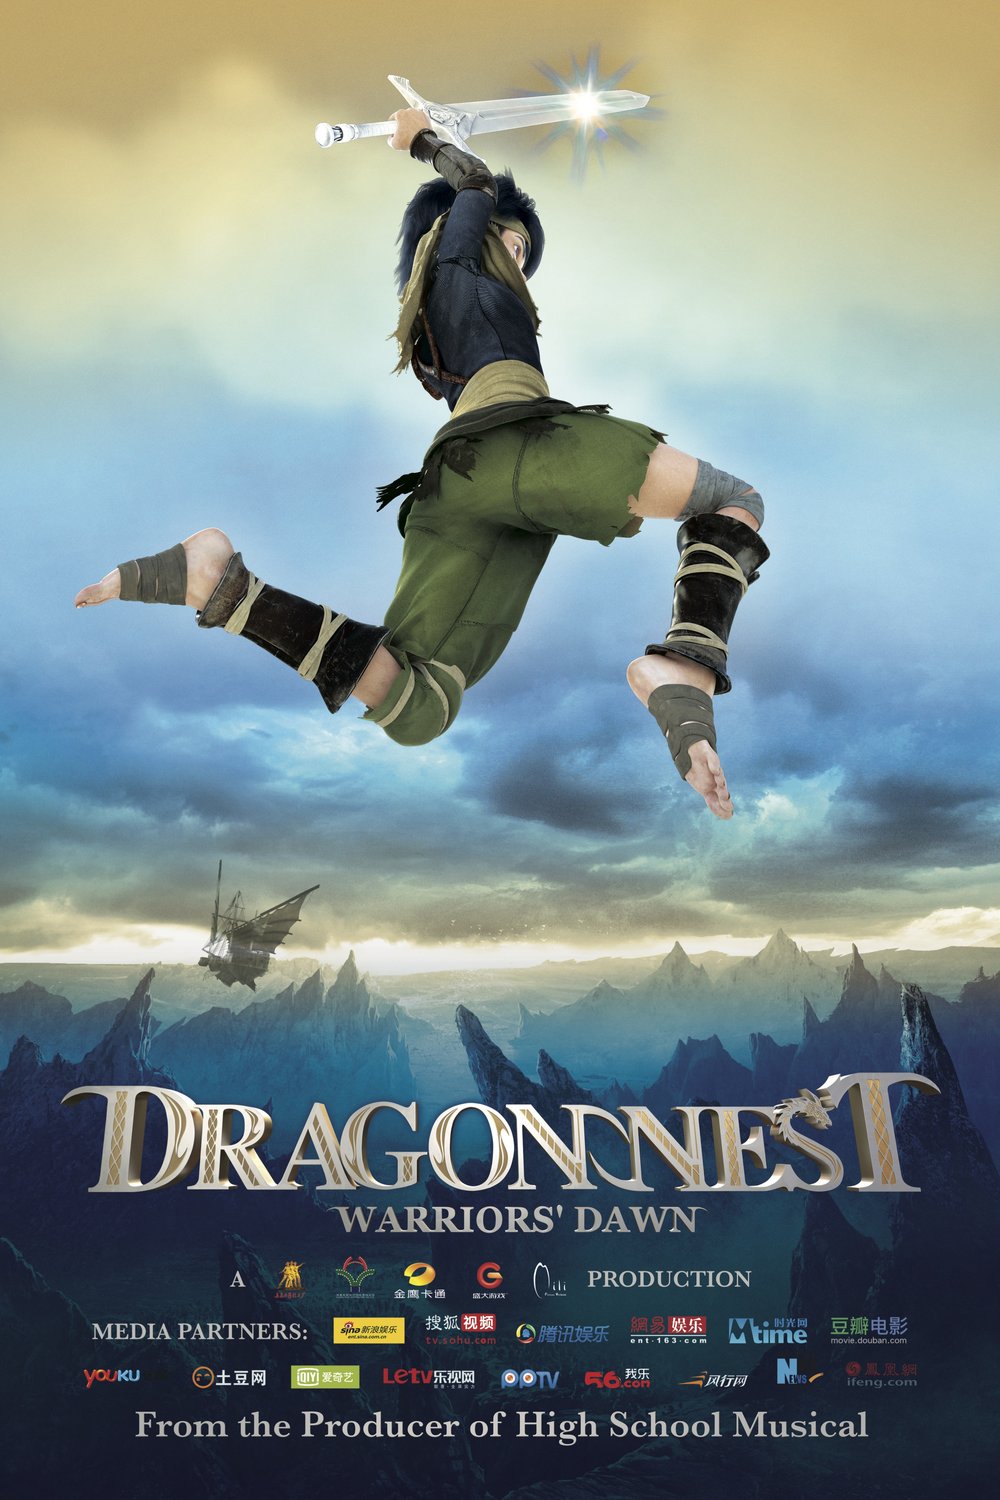 Poster of the movie Dragon Nest: Warriors' Dawn